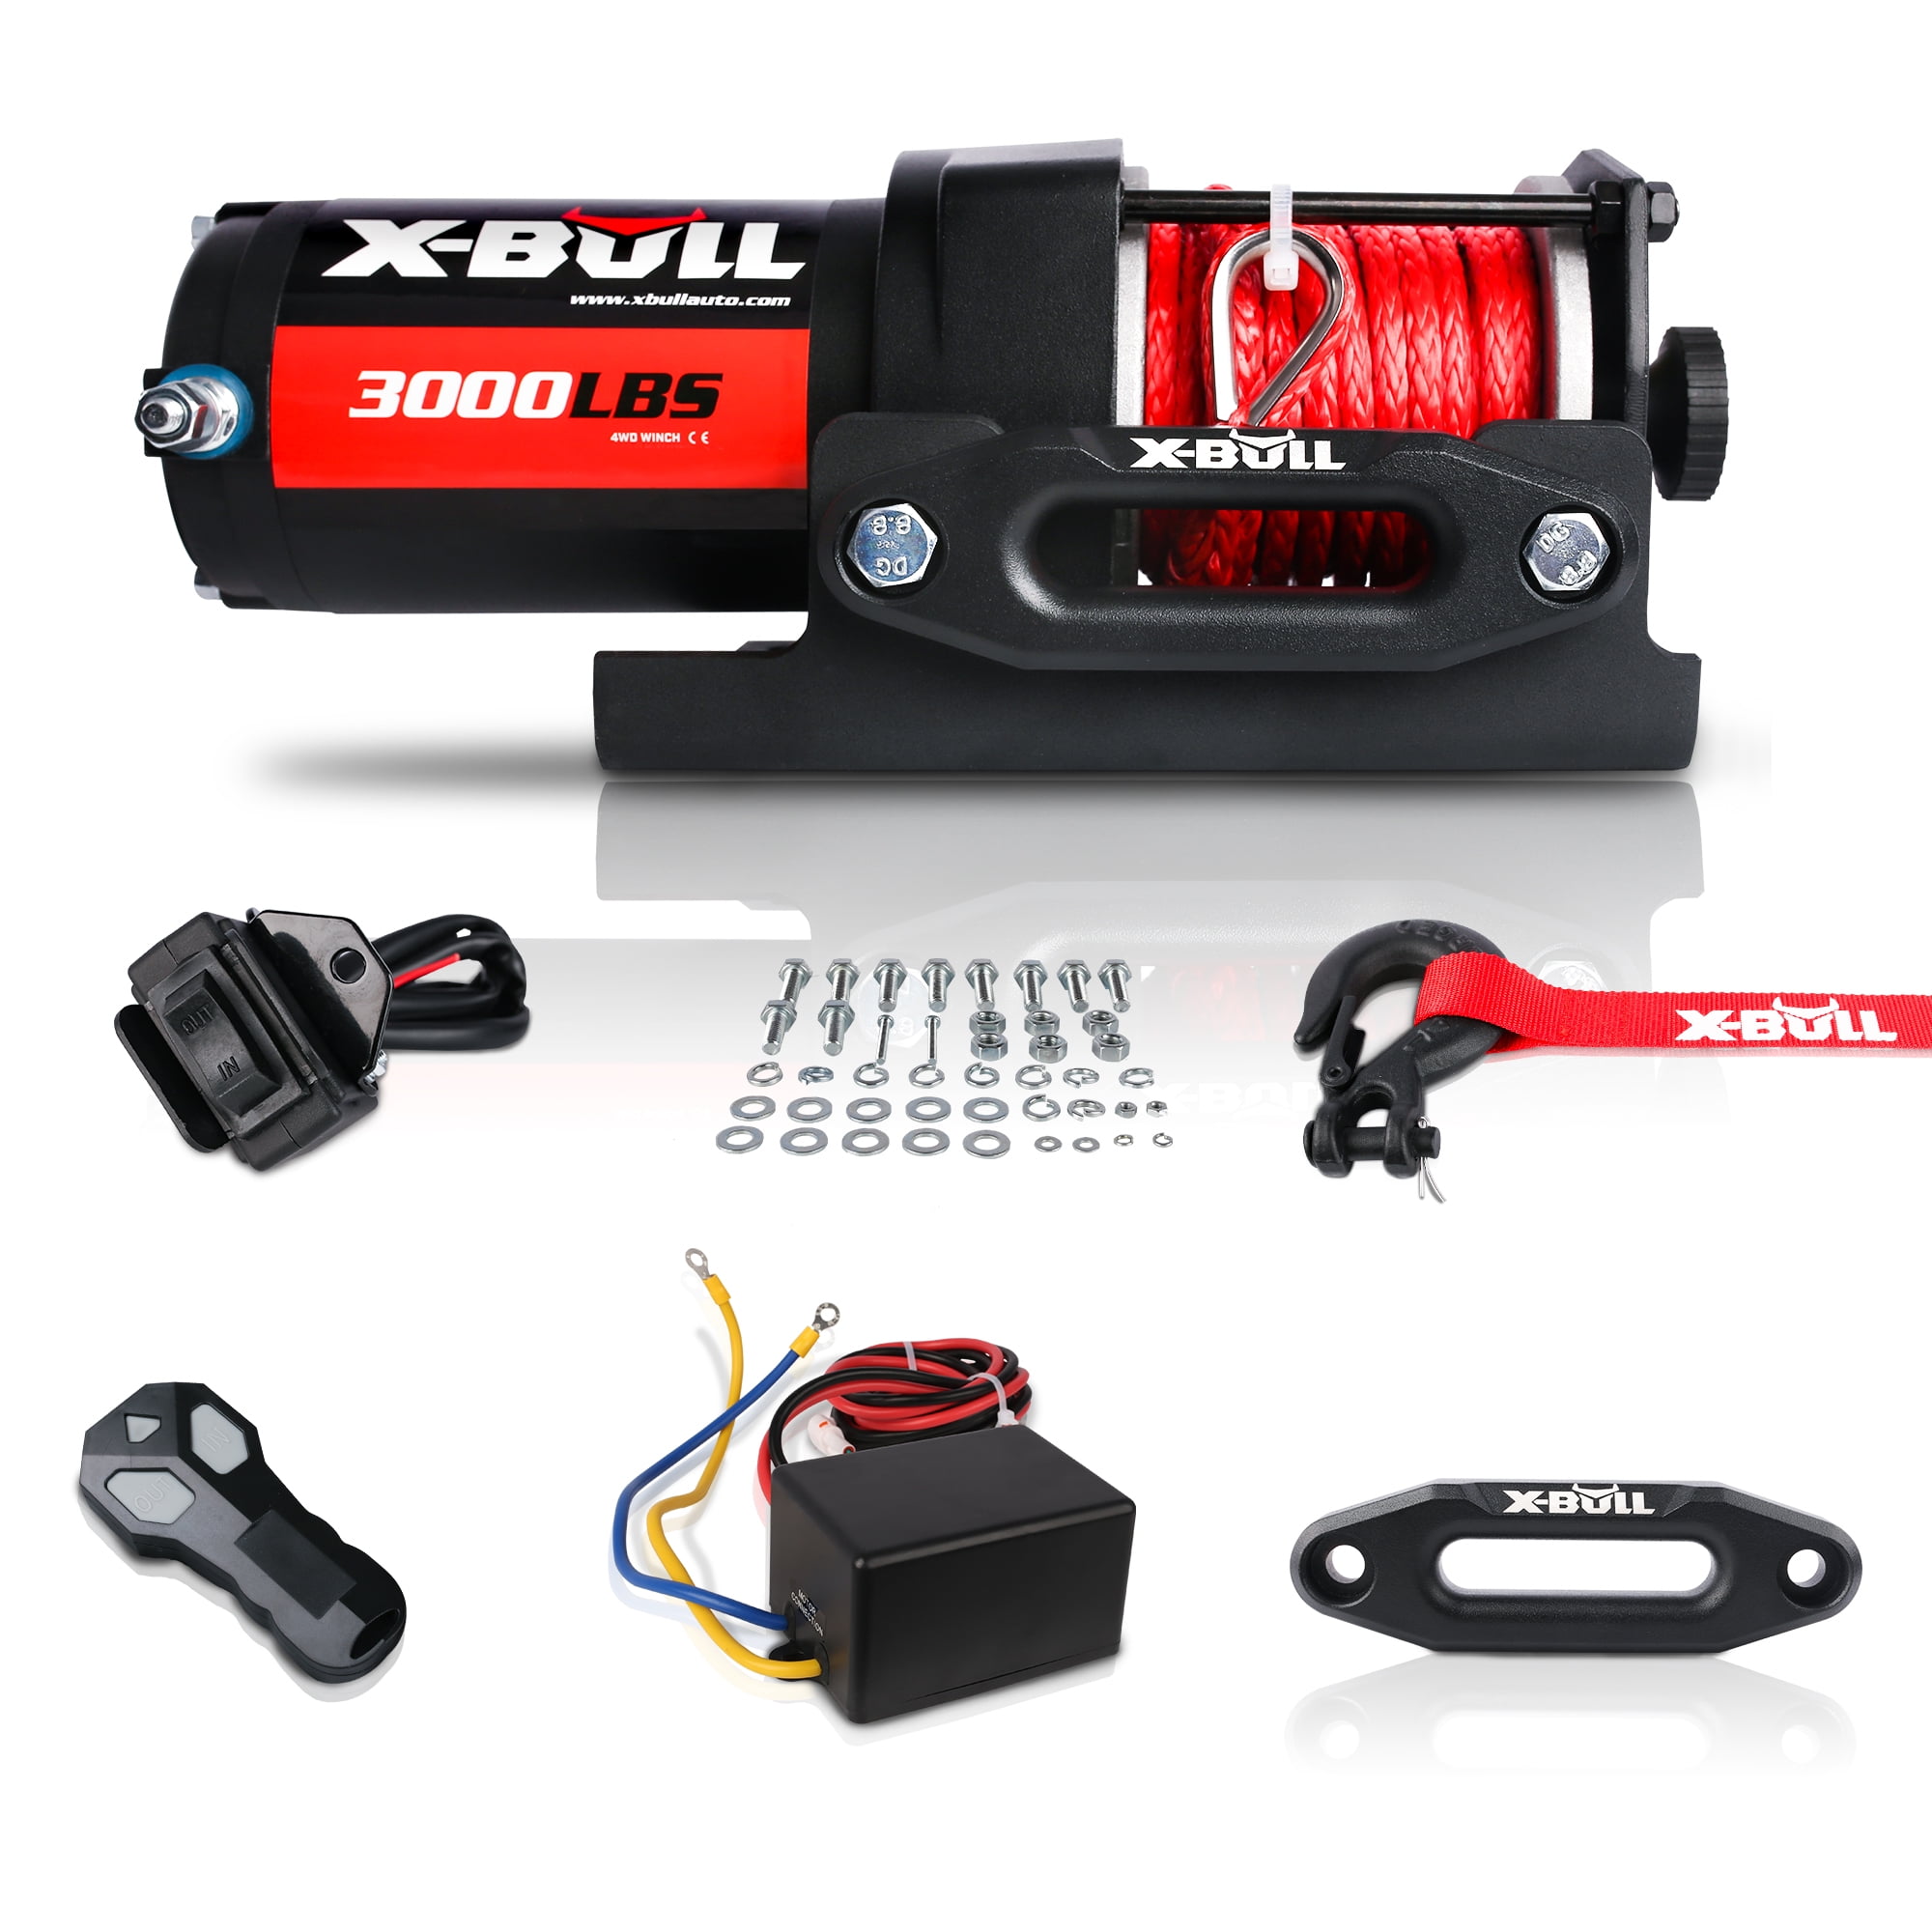 X-BULL 12V 3000LBS Steel Wire Electric Winch for Towing ATV/UTV